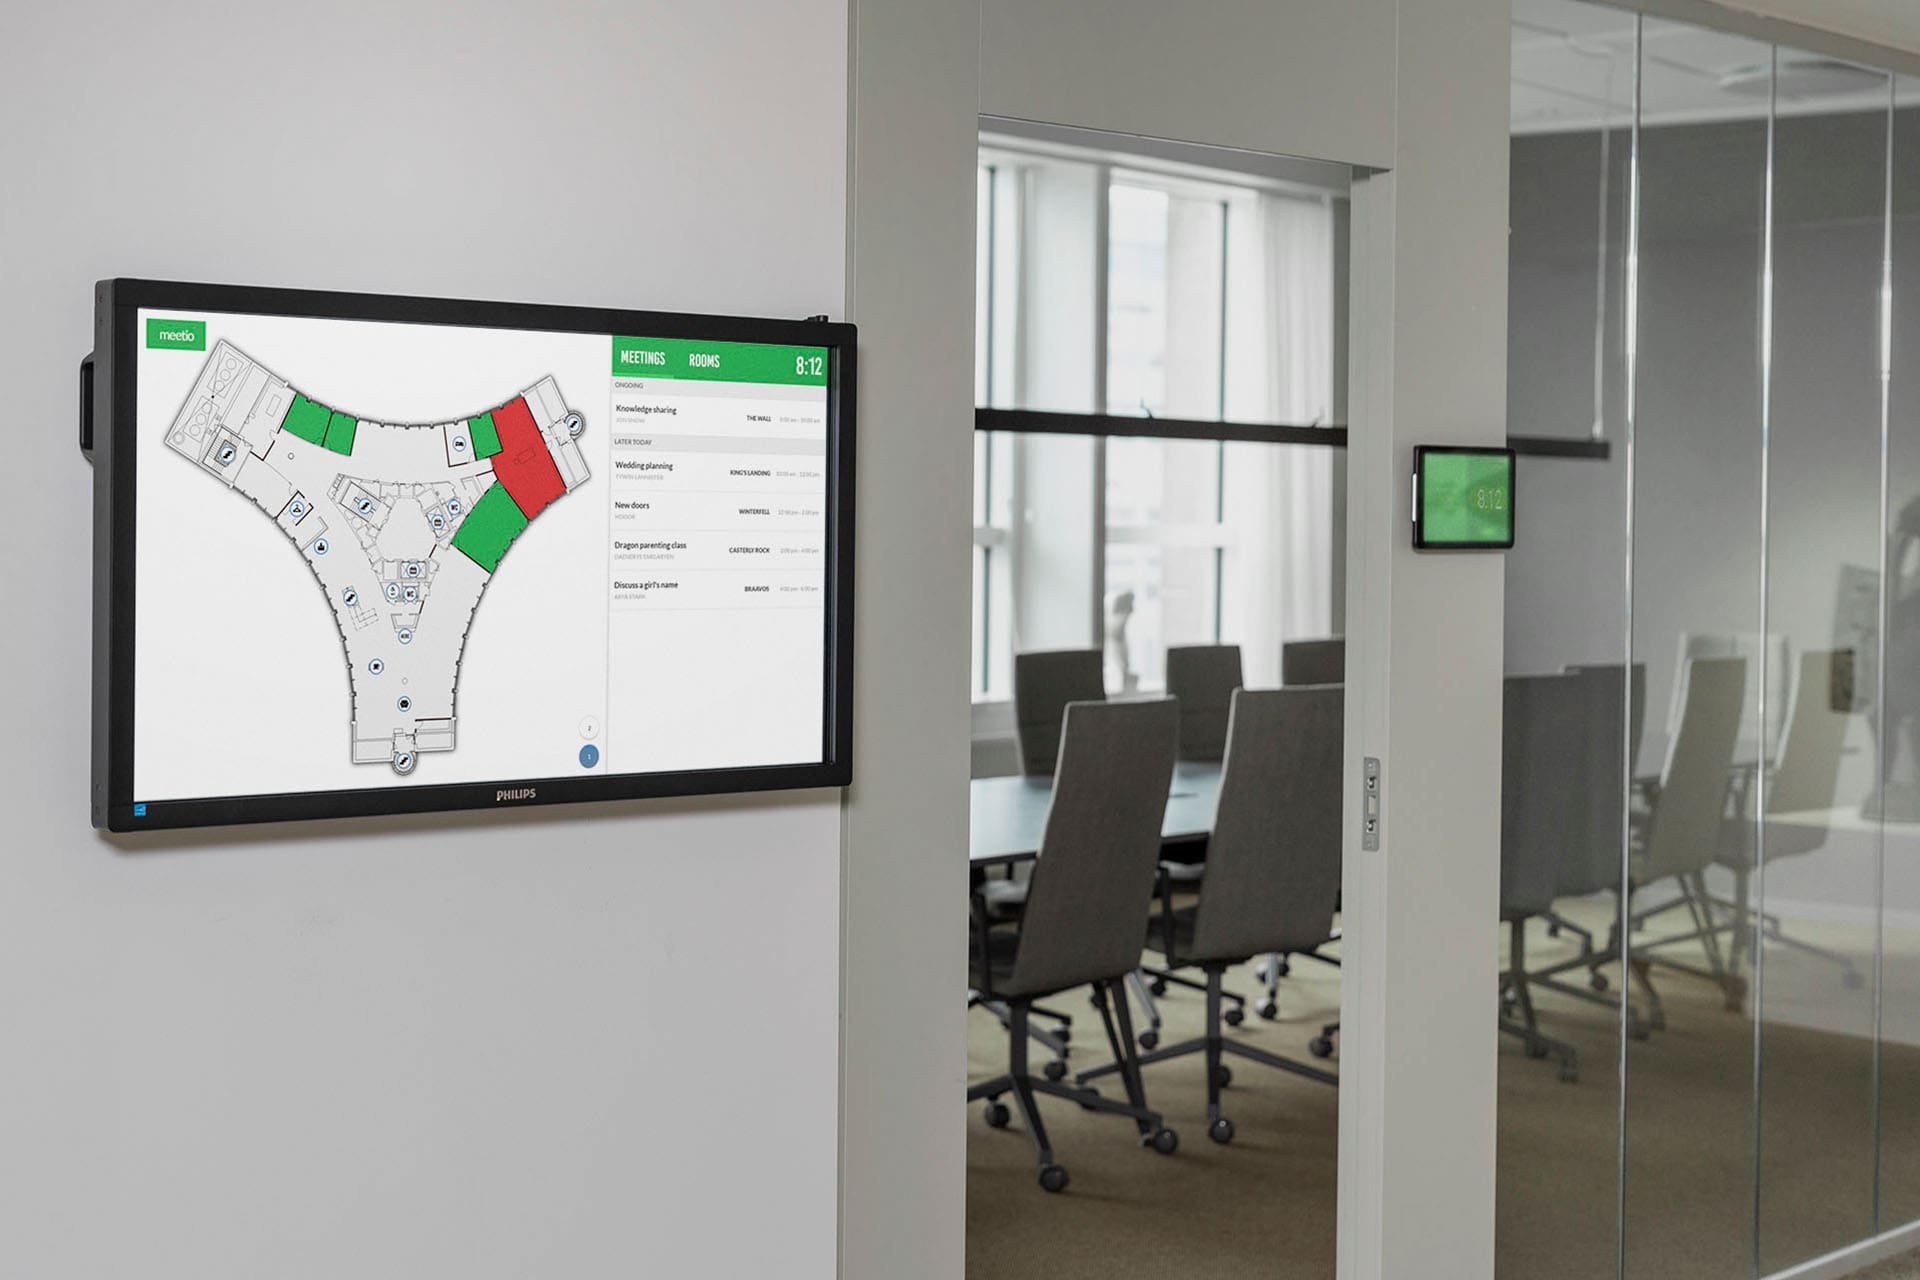 Meetio View screen with map view outside a conference room